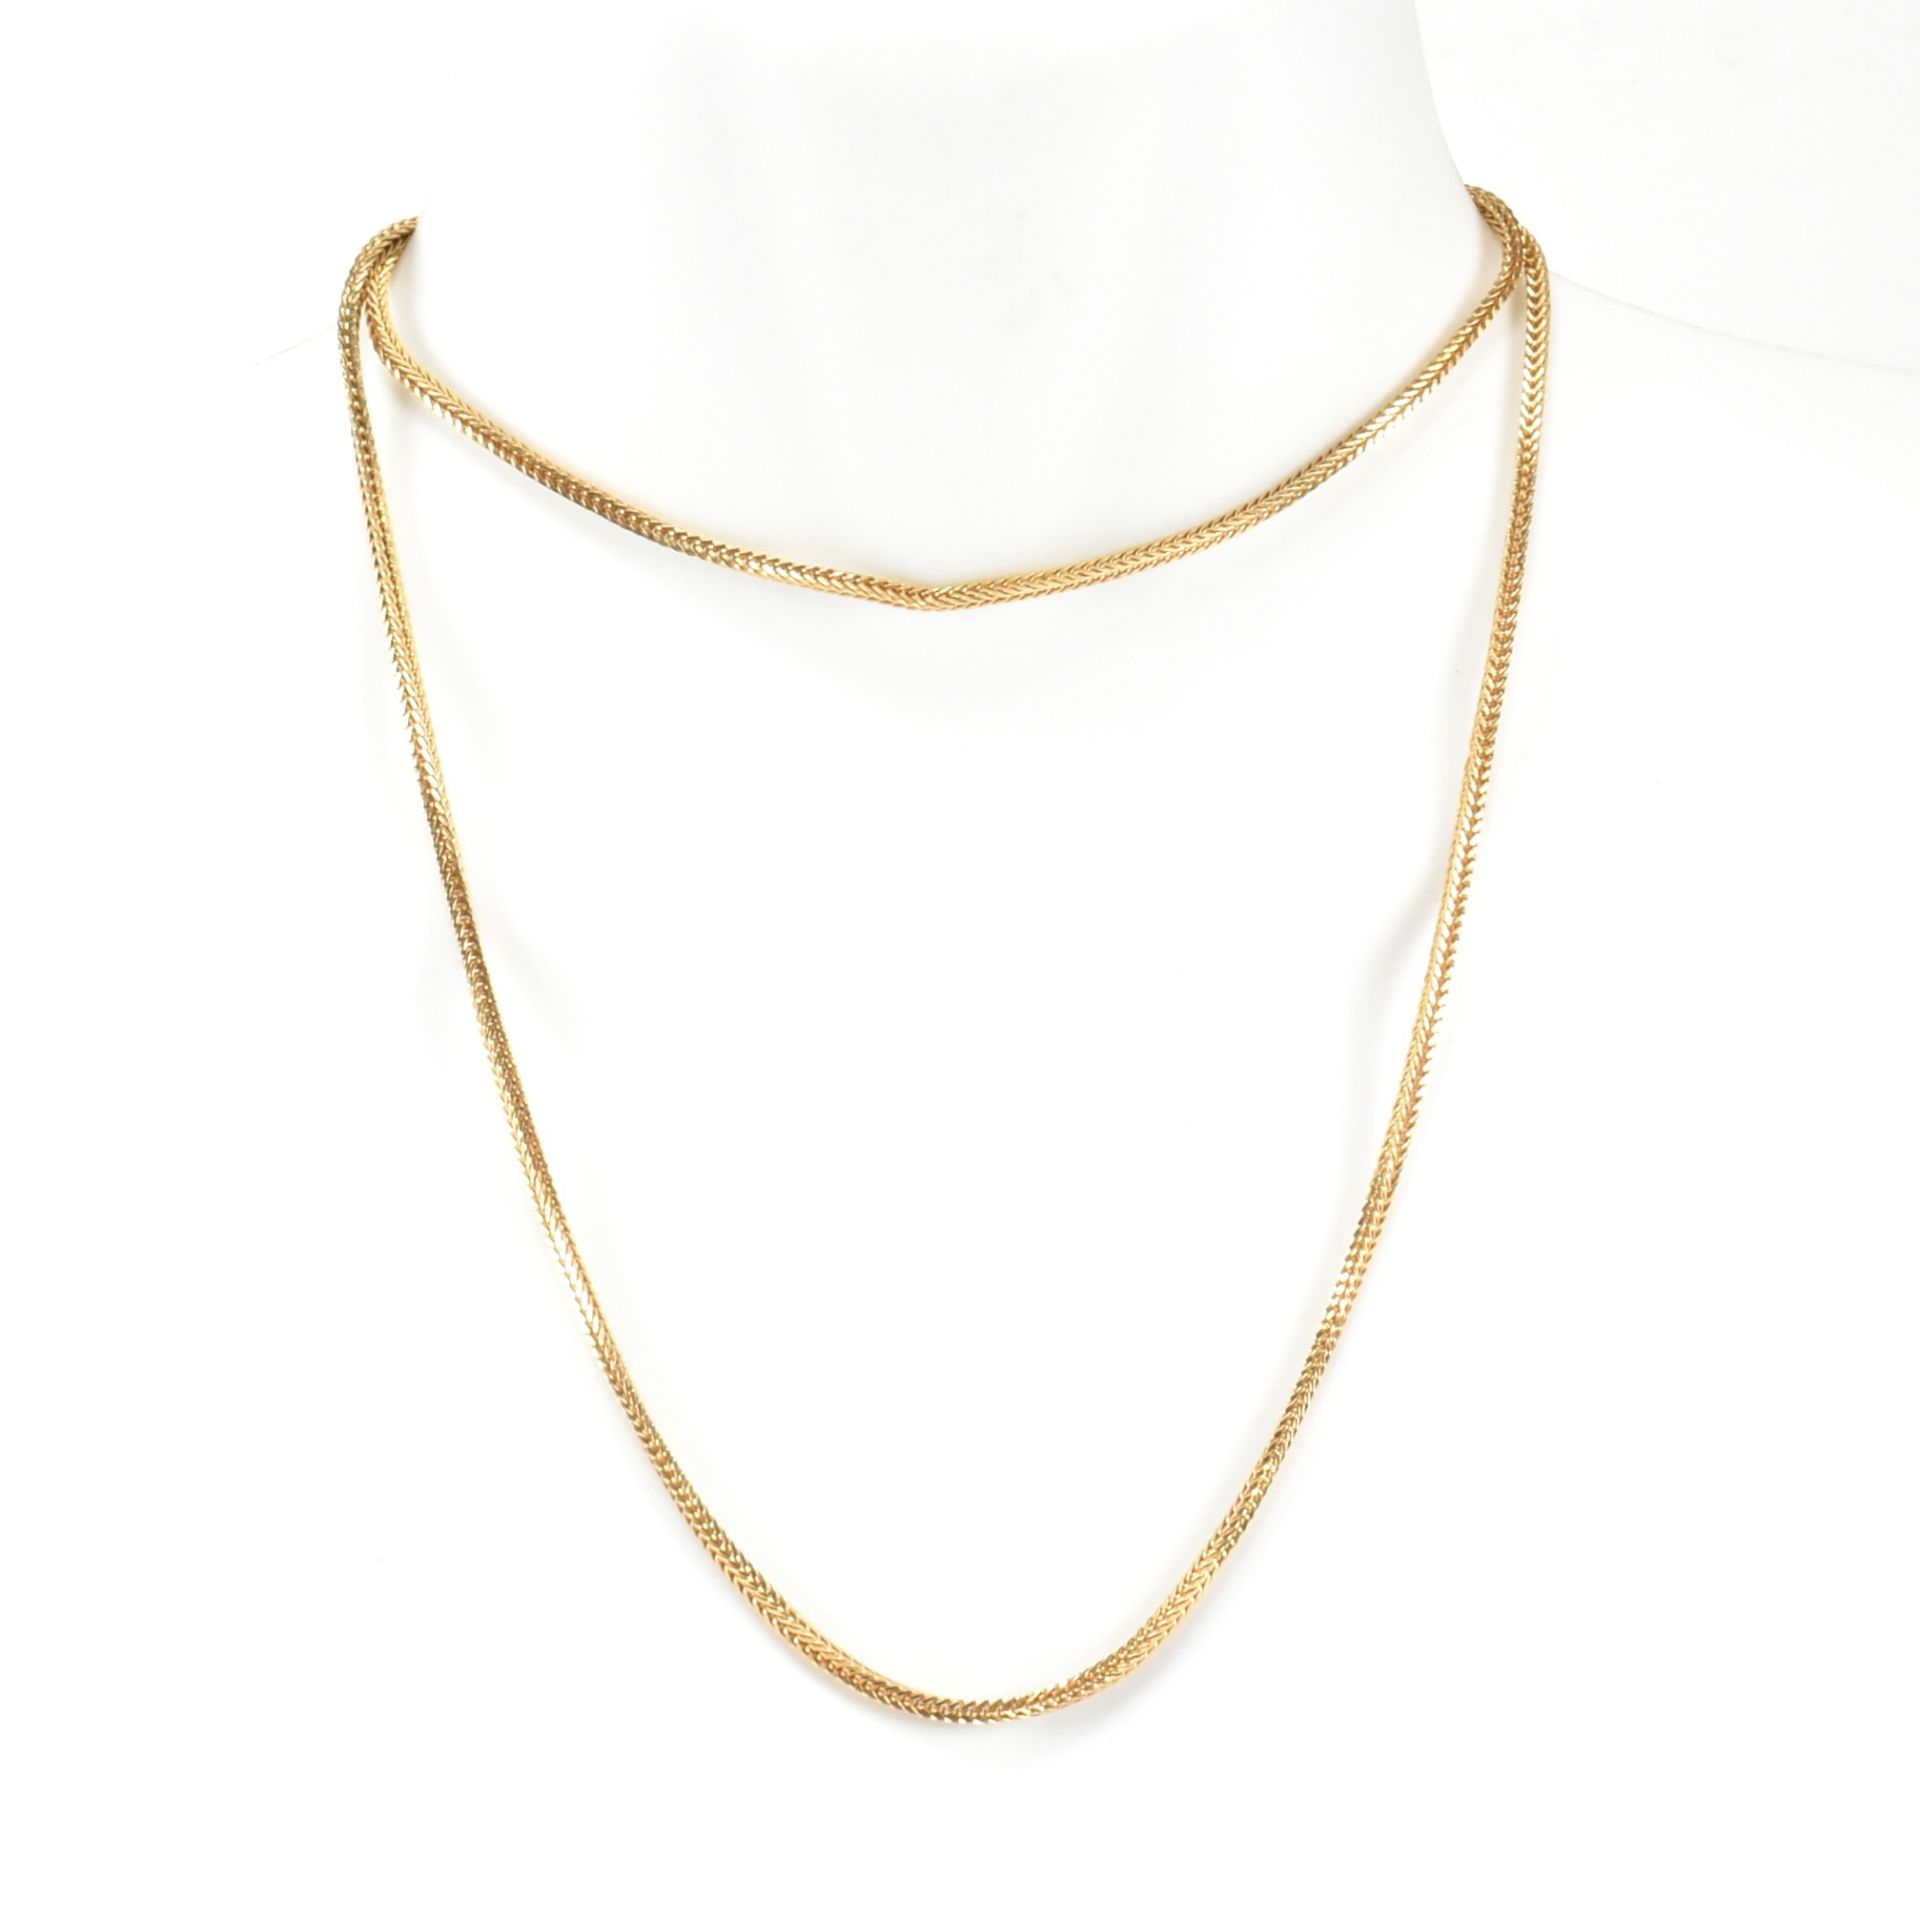 ITALIAN 18CT GOLD SNAKE CHAIN NECKLACE